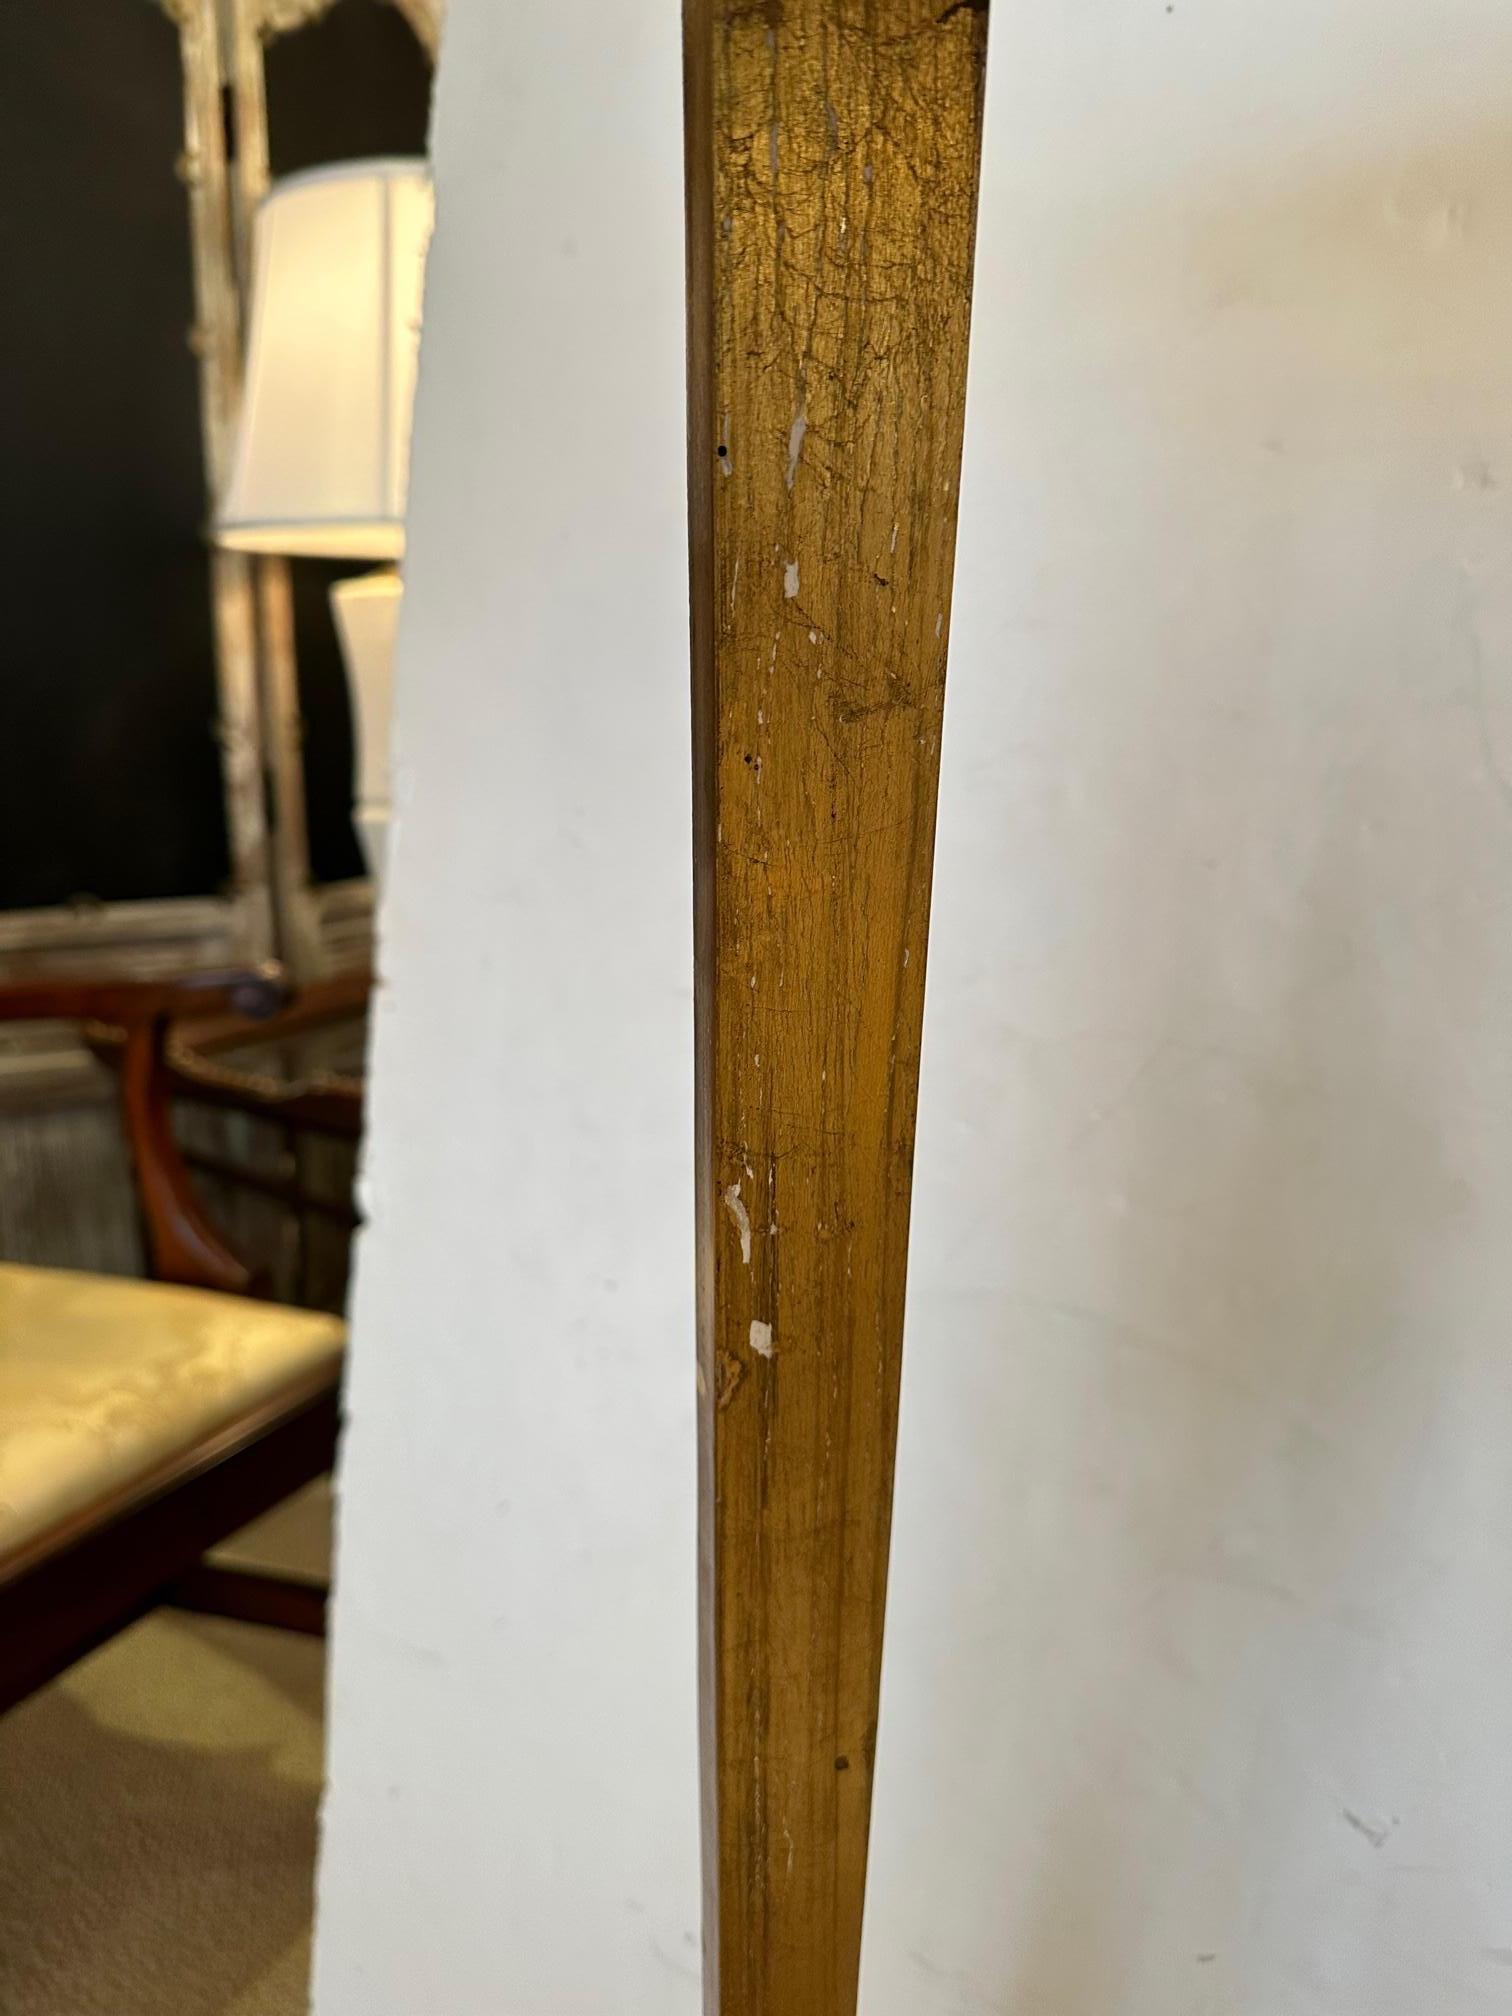 Fancy Tall French Neoclassical Pedestal or Plant Stand with Marble Top For Sale 2